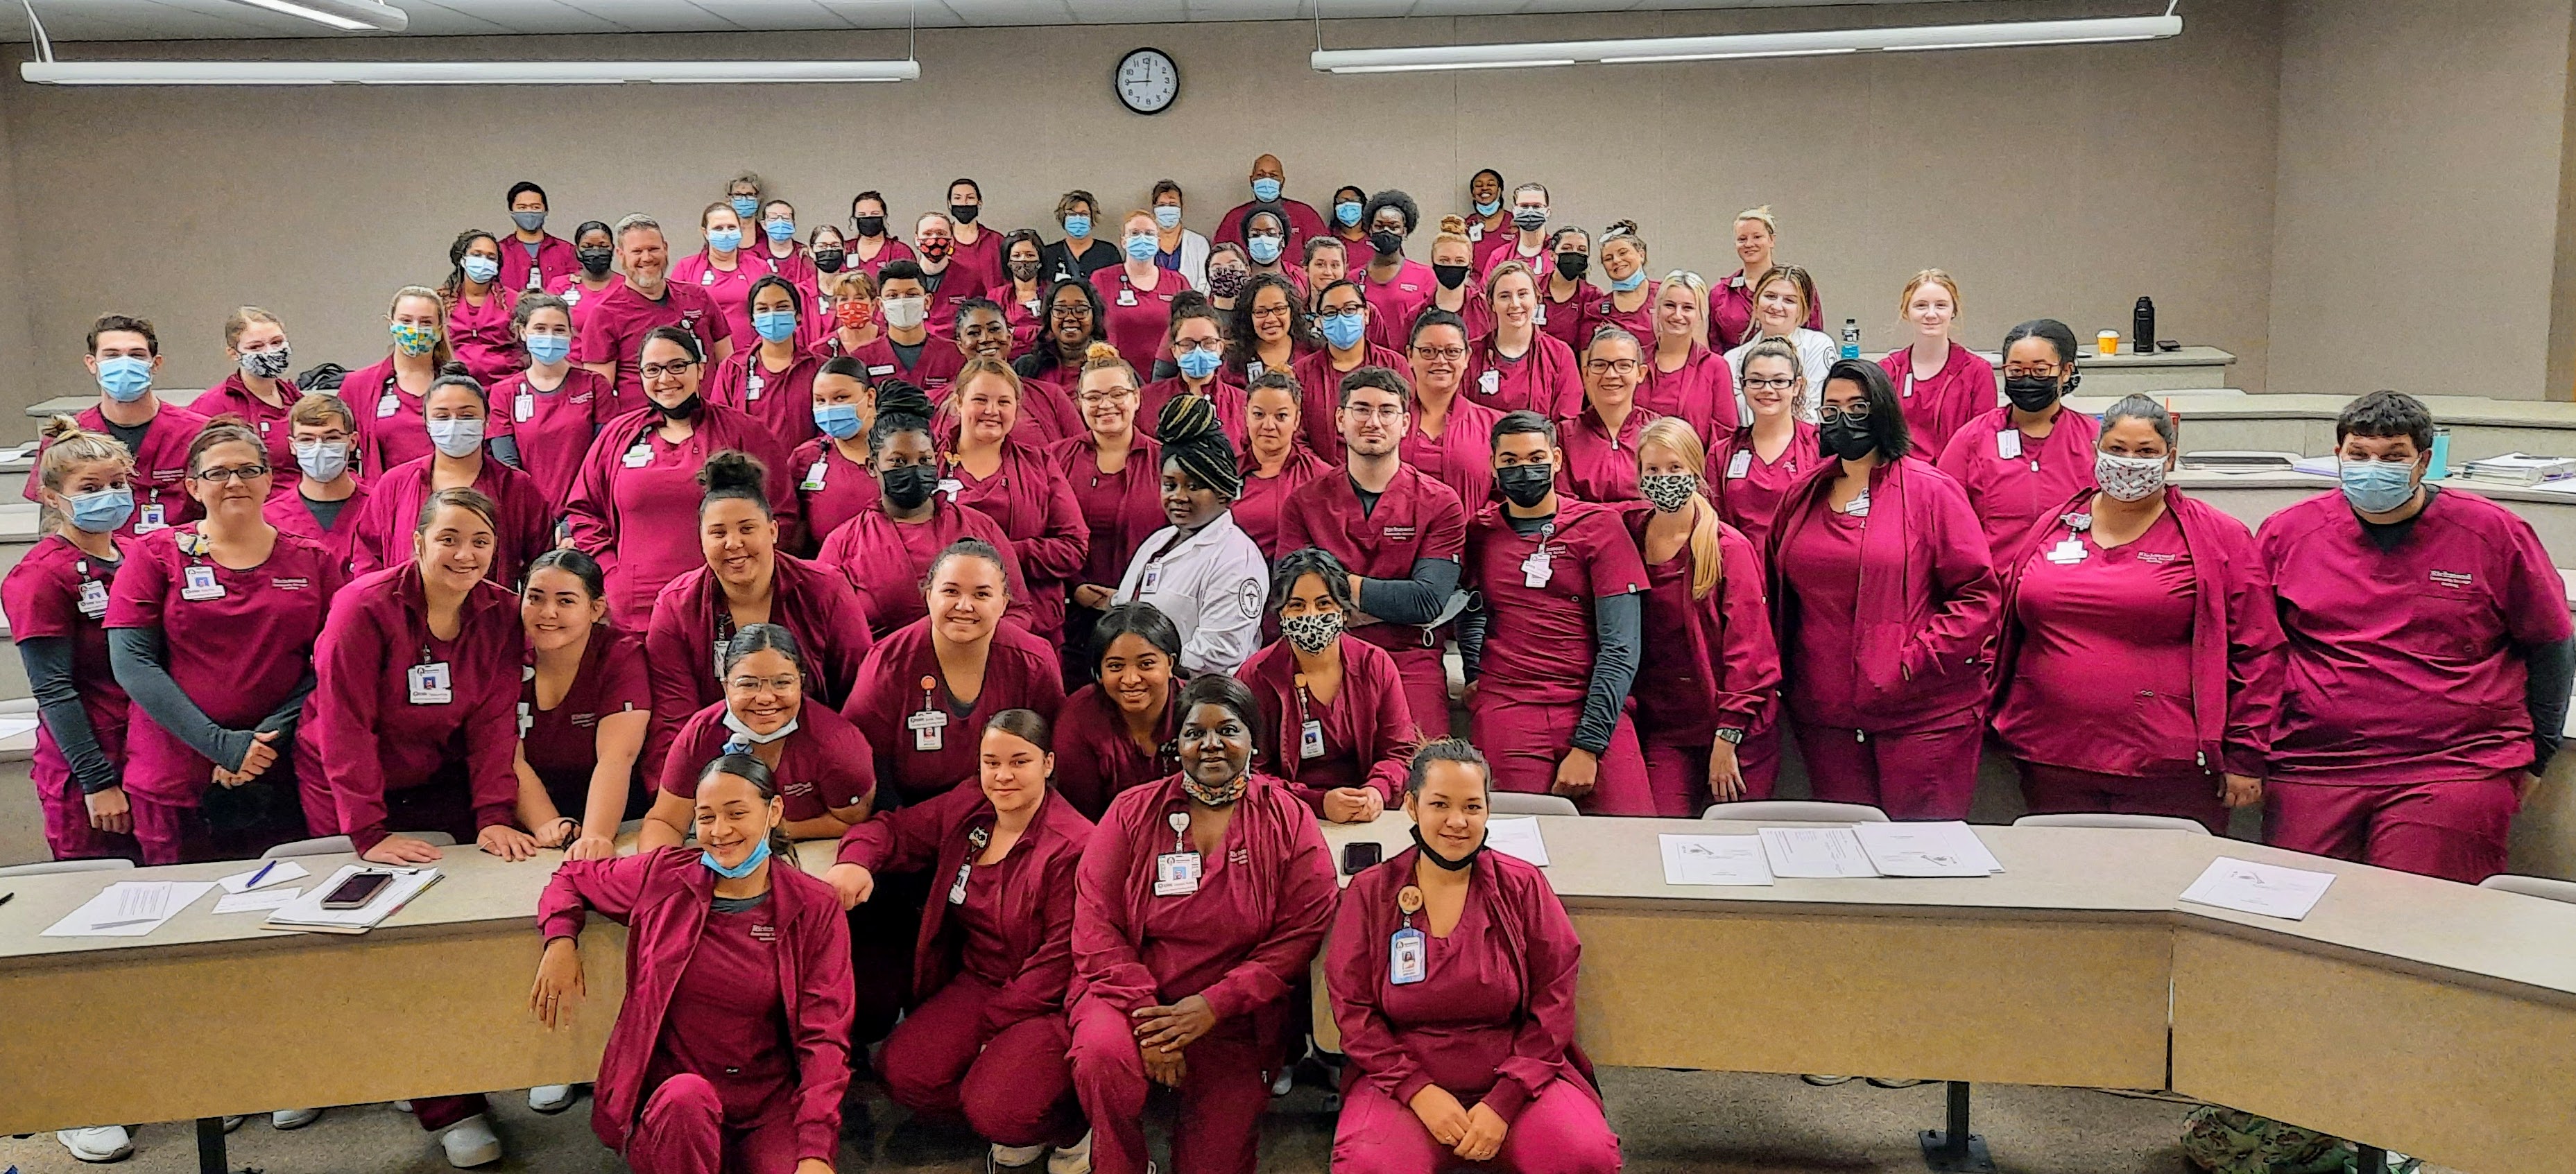 A large group of nursing students pose for photo